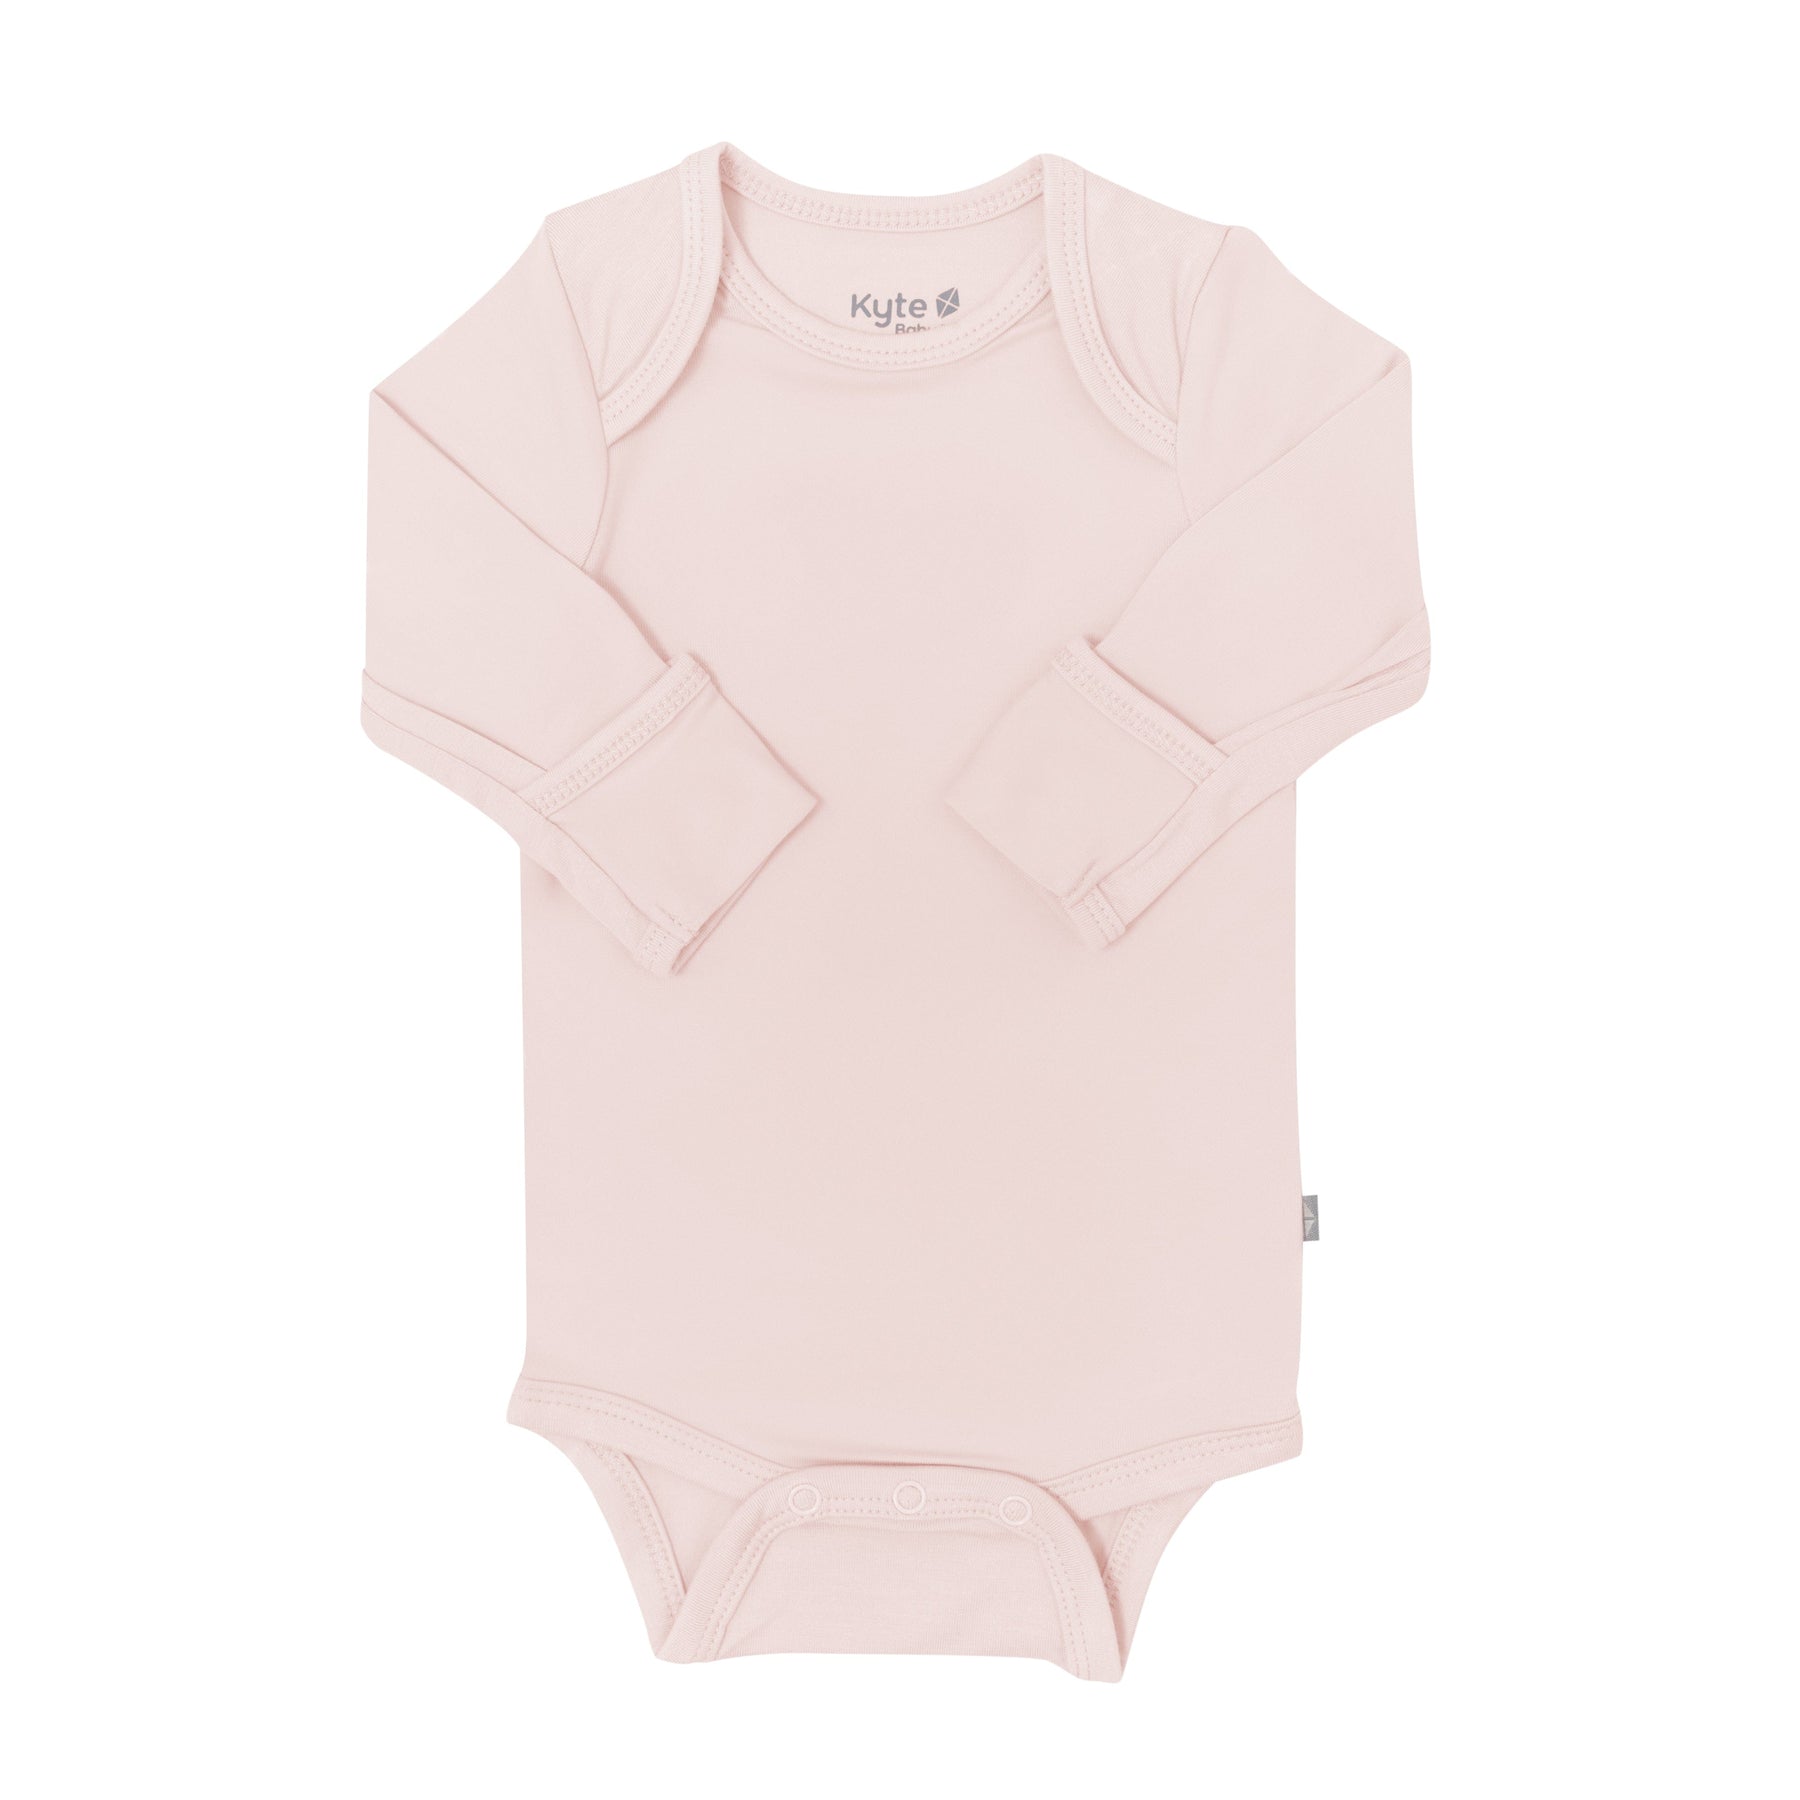 Kyte Baby Long Sleeve Bodysuit in Blush with fold over cuffs